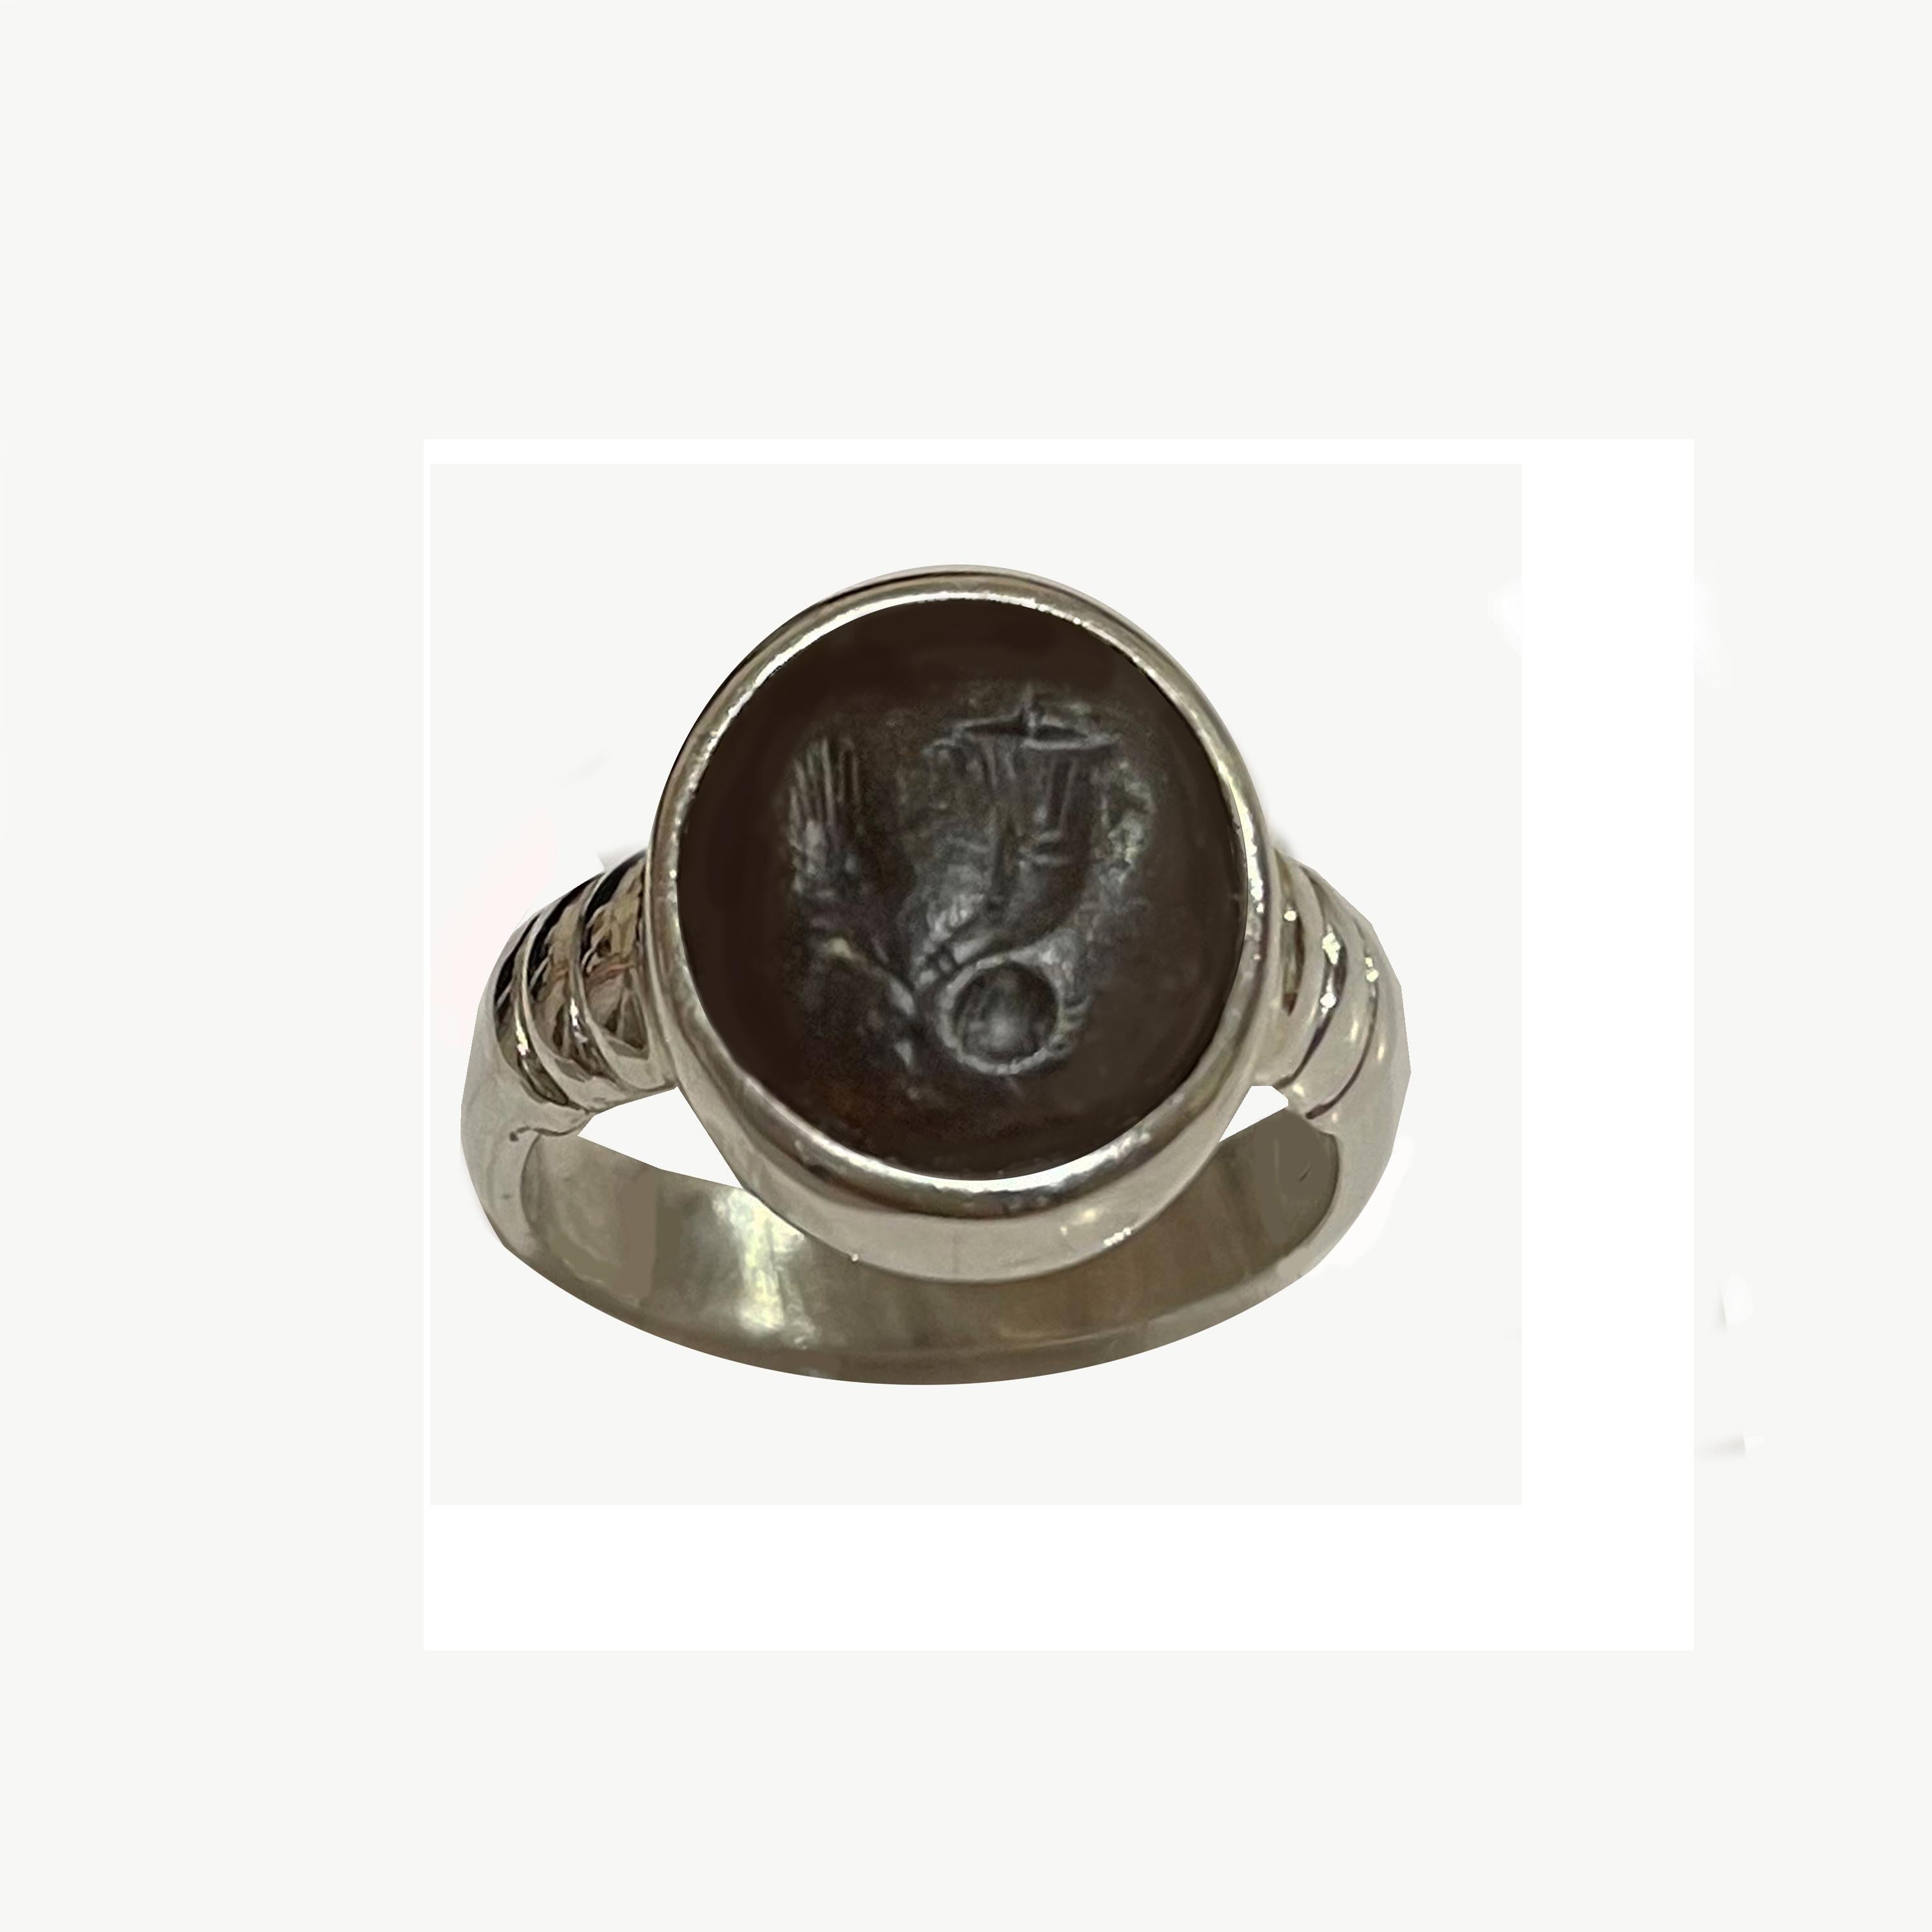 In this  extraordinary sterling silver ring has been set  an authentic Roman (1st-2nd century AD) intaglio on agate with the allegorical symbols of luck and abundance: a cornucopia, an ear and a globe (representing the world). 
The Cornucopia,